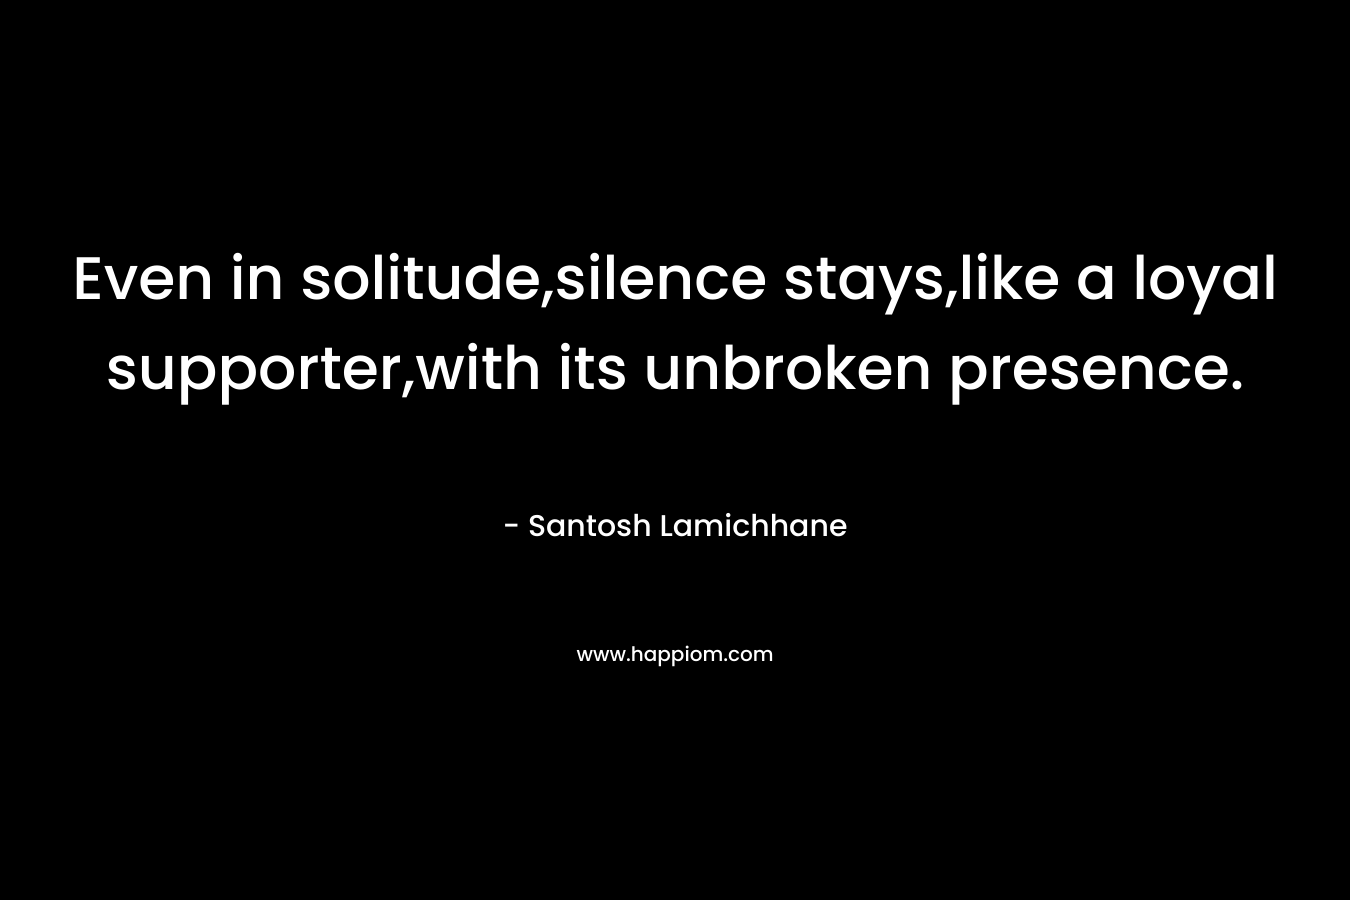 Even in solitude,silence stays,like a loyal supporter,with its unbroken presence.